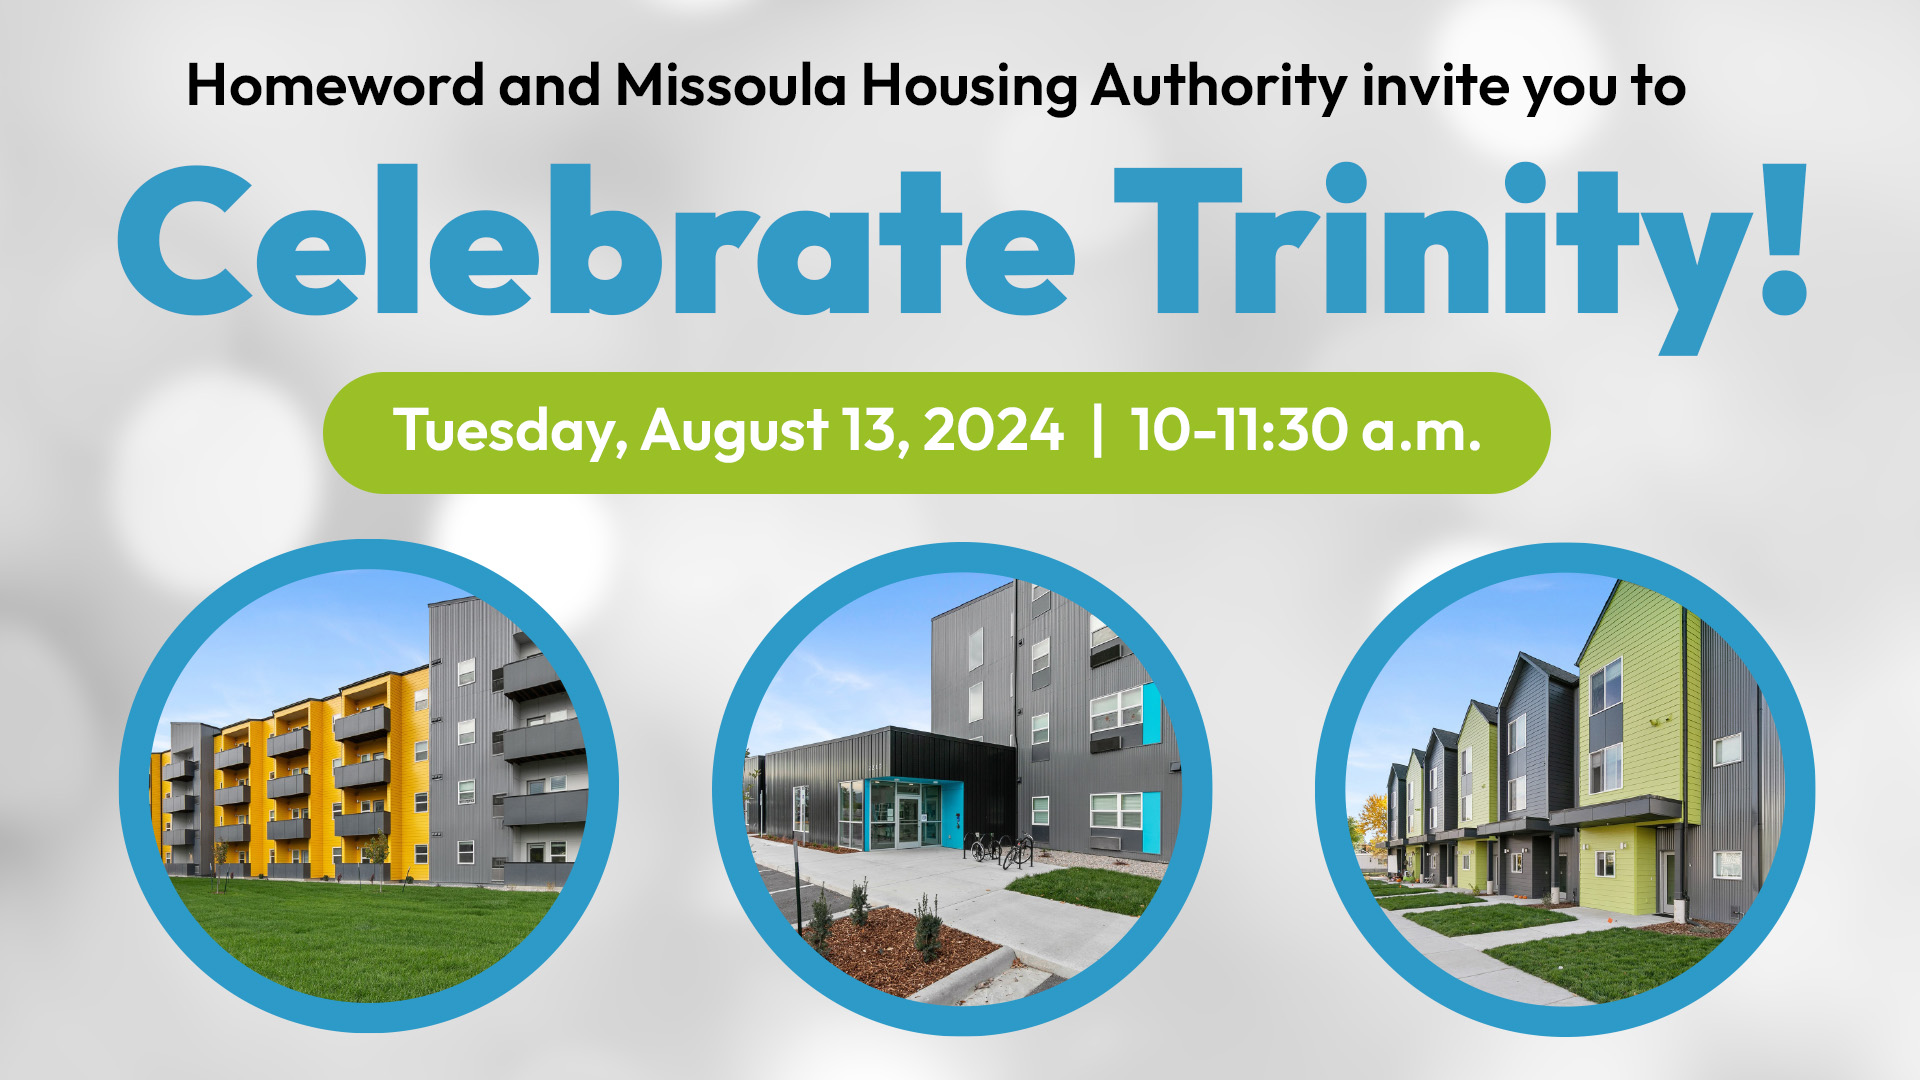 Homeword and Missoula Housing Authority invite you to Celebrate Trinity Tuesday, August 13, 2024 from 10-11:30